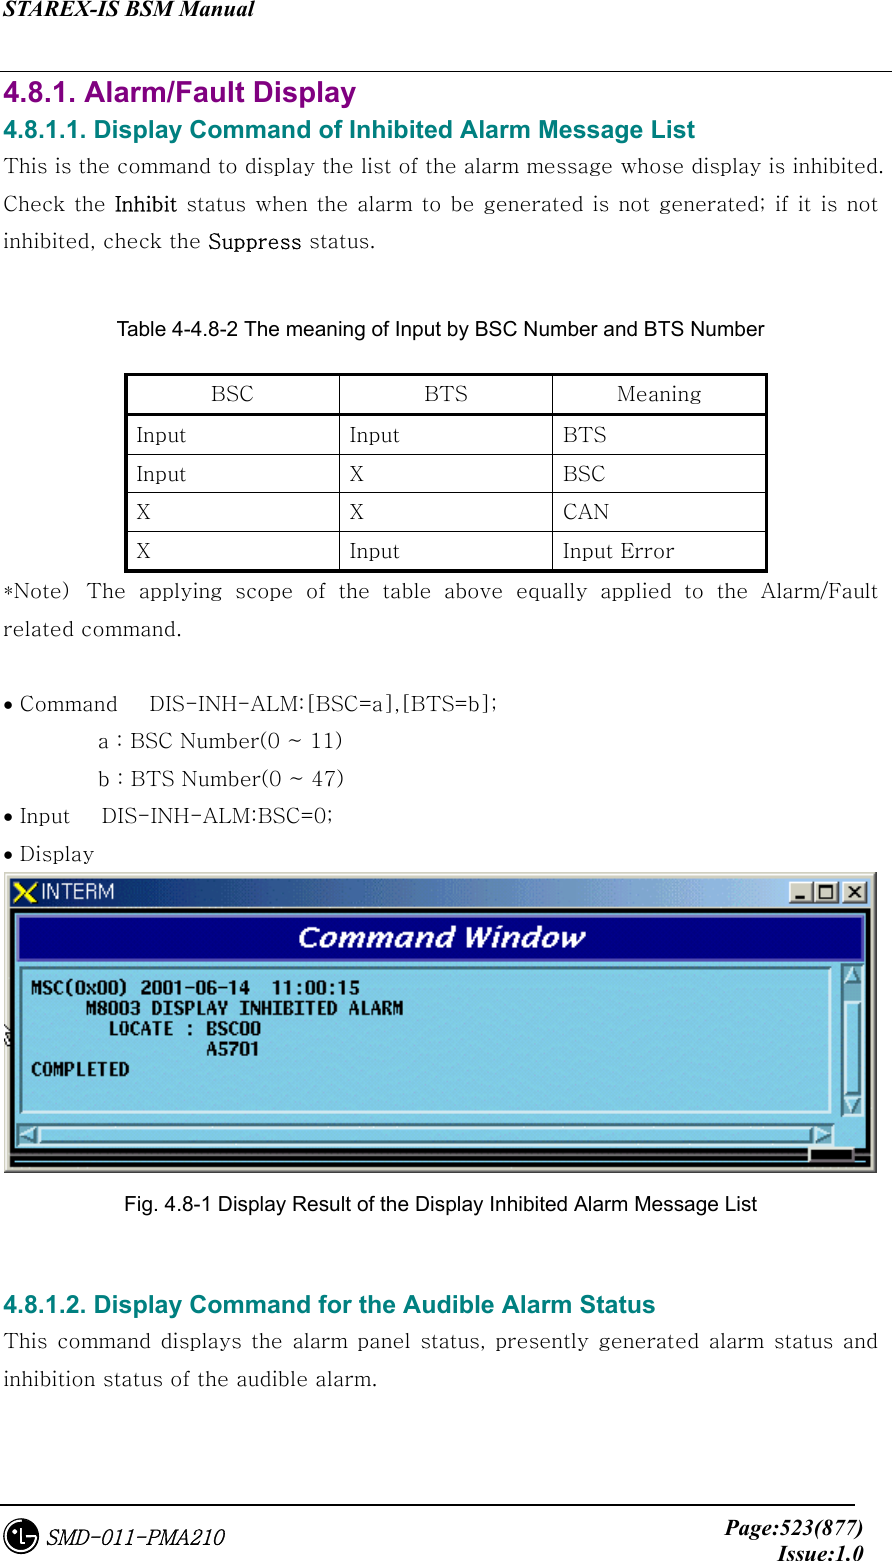 STAREX-IS BSM Manual     Page:523(877)Issue:1.0SMD-011-PMA210 4.8.1. Alarm/Fault Display 4.8.1.1. Display Command of Inhibited Alarm Message List   This is the command to display the list of the alarm message whose display is inhibited. Check the Inhibit status  when the alarm to be generated is not generated; if it  is not inhibited, check the Suppress status.  Table 4-4.8-2 The meaning of Input by BSC Number and BTS Number   BSC  BTS  Meaning Input  Input  BTS Input  X  BSC X  X  CAN X  Input  Input Error *Note)  The  applying  scope  of  the  table  above  equally  applied  to the Alarm/Fault related command.    • Command   DIS-INH-ALM:[BSC=a],[BTS=b];          a : BSC Number(0 ~ 11)          b : BTS Number(0 ~ 47) • Input   DIS-INH-ALM:BSC=0; • Display    Fig. 4.8-1 Display Result of the Display Inhibited Alarm Message List  4.8.1.2. Display Command for the Audible Alarm Status This  command  displays the  alarm panel  status,  presently generated  alarm  status and inhibition status of the audible alarm.  